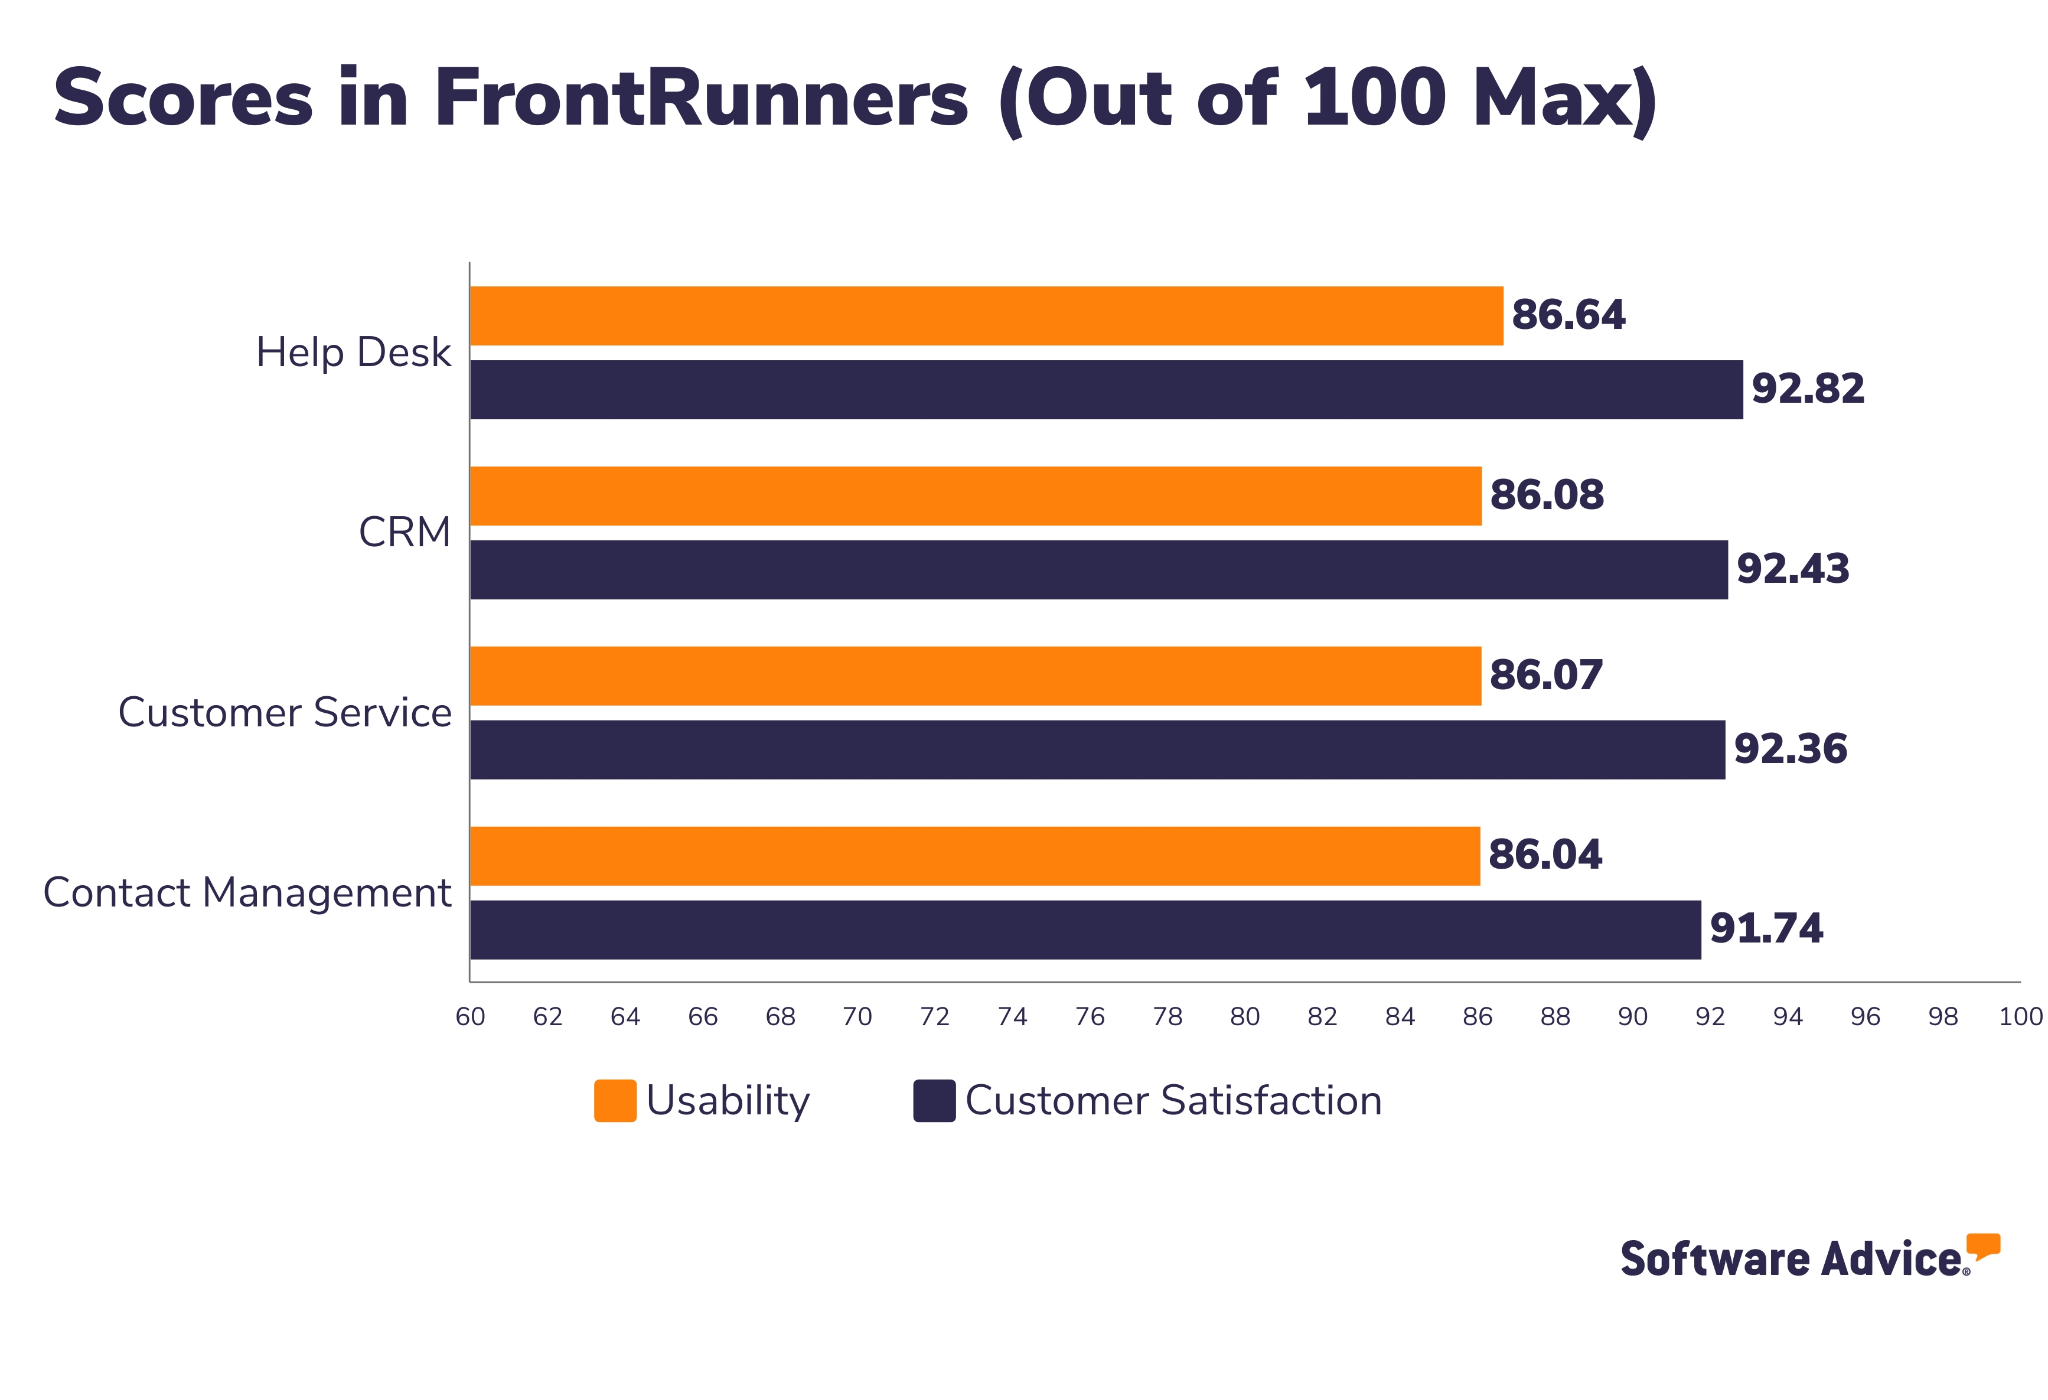 OnContact-CRM-Software-Advice-FrontRunners-Snapshot